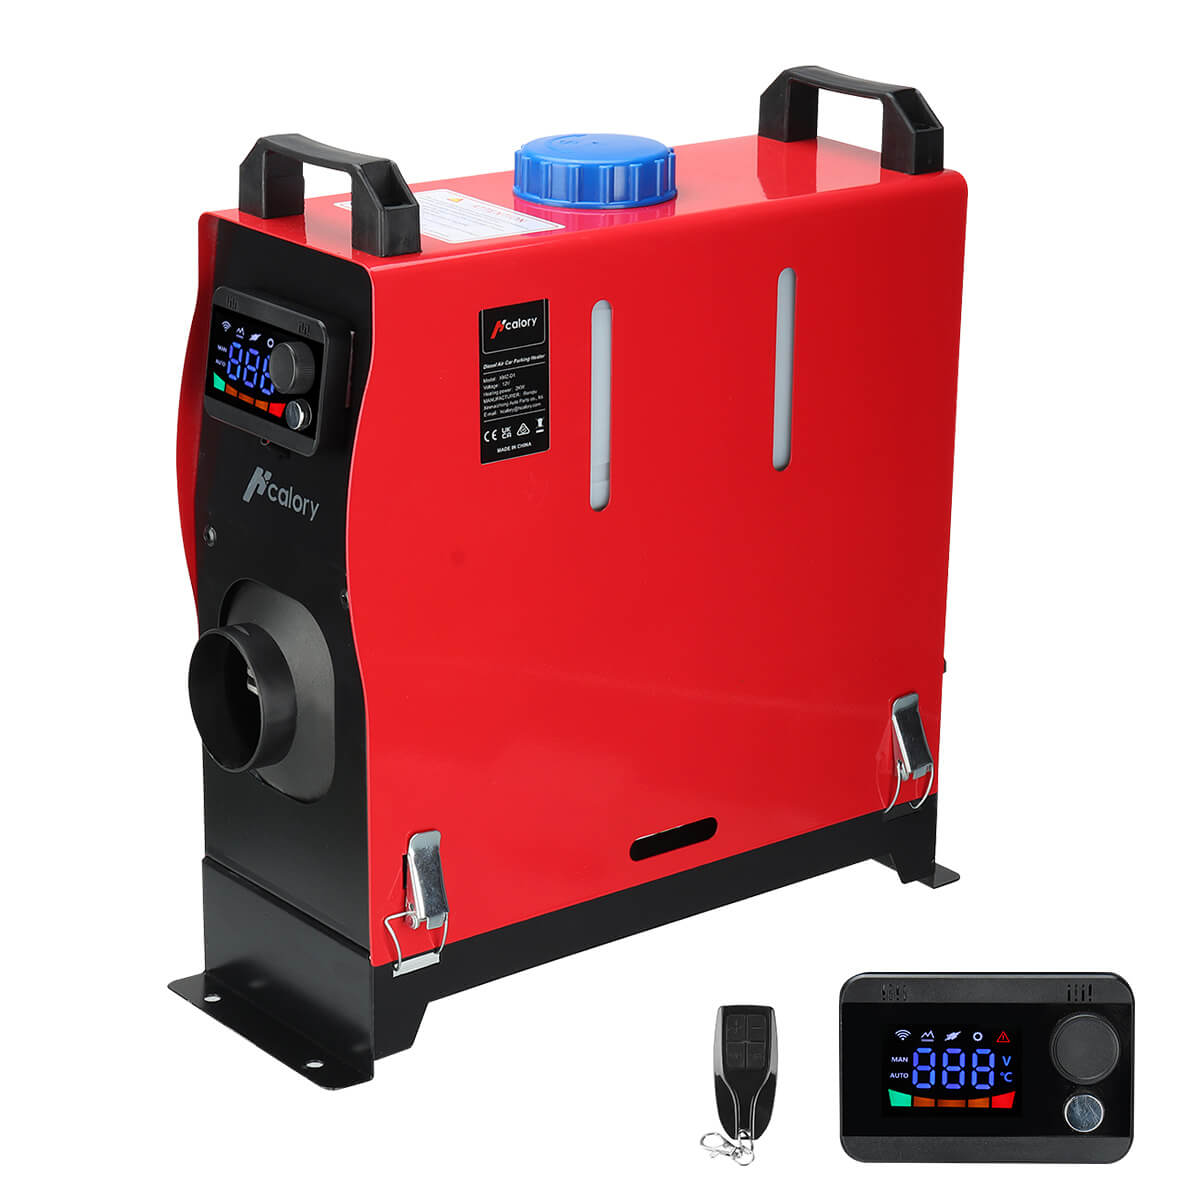 HC-A03 Diesel Air Heater, Universal LCD All In One - Hcalory